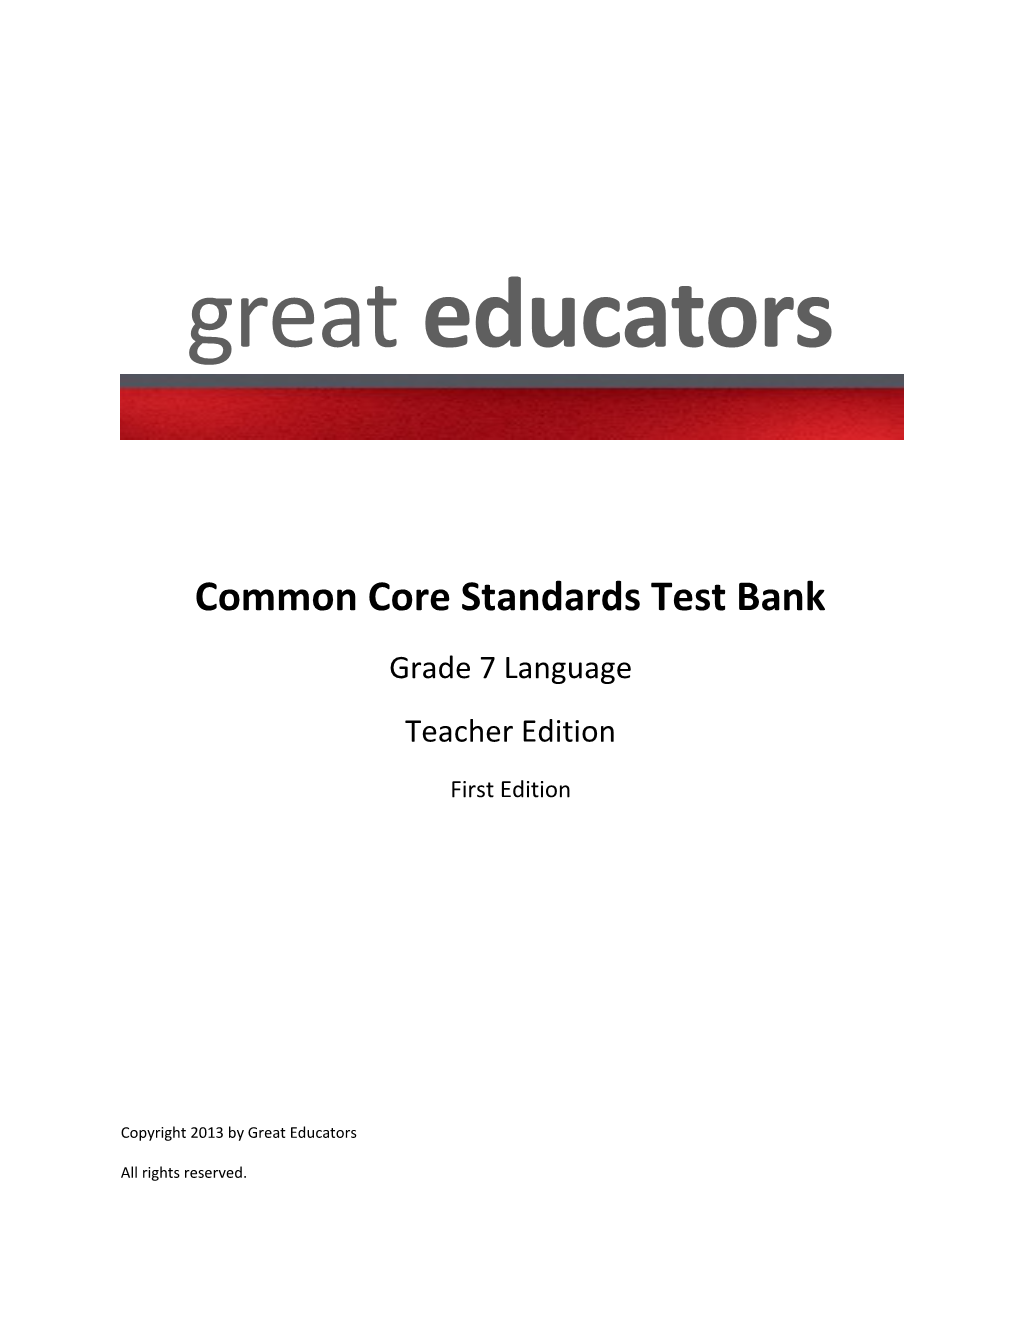 Common Core Standards Test Bank